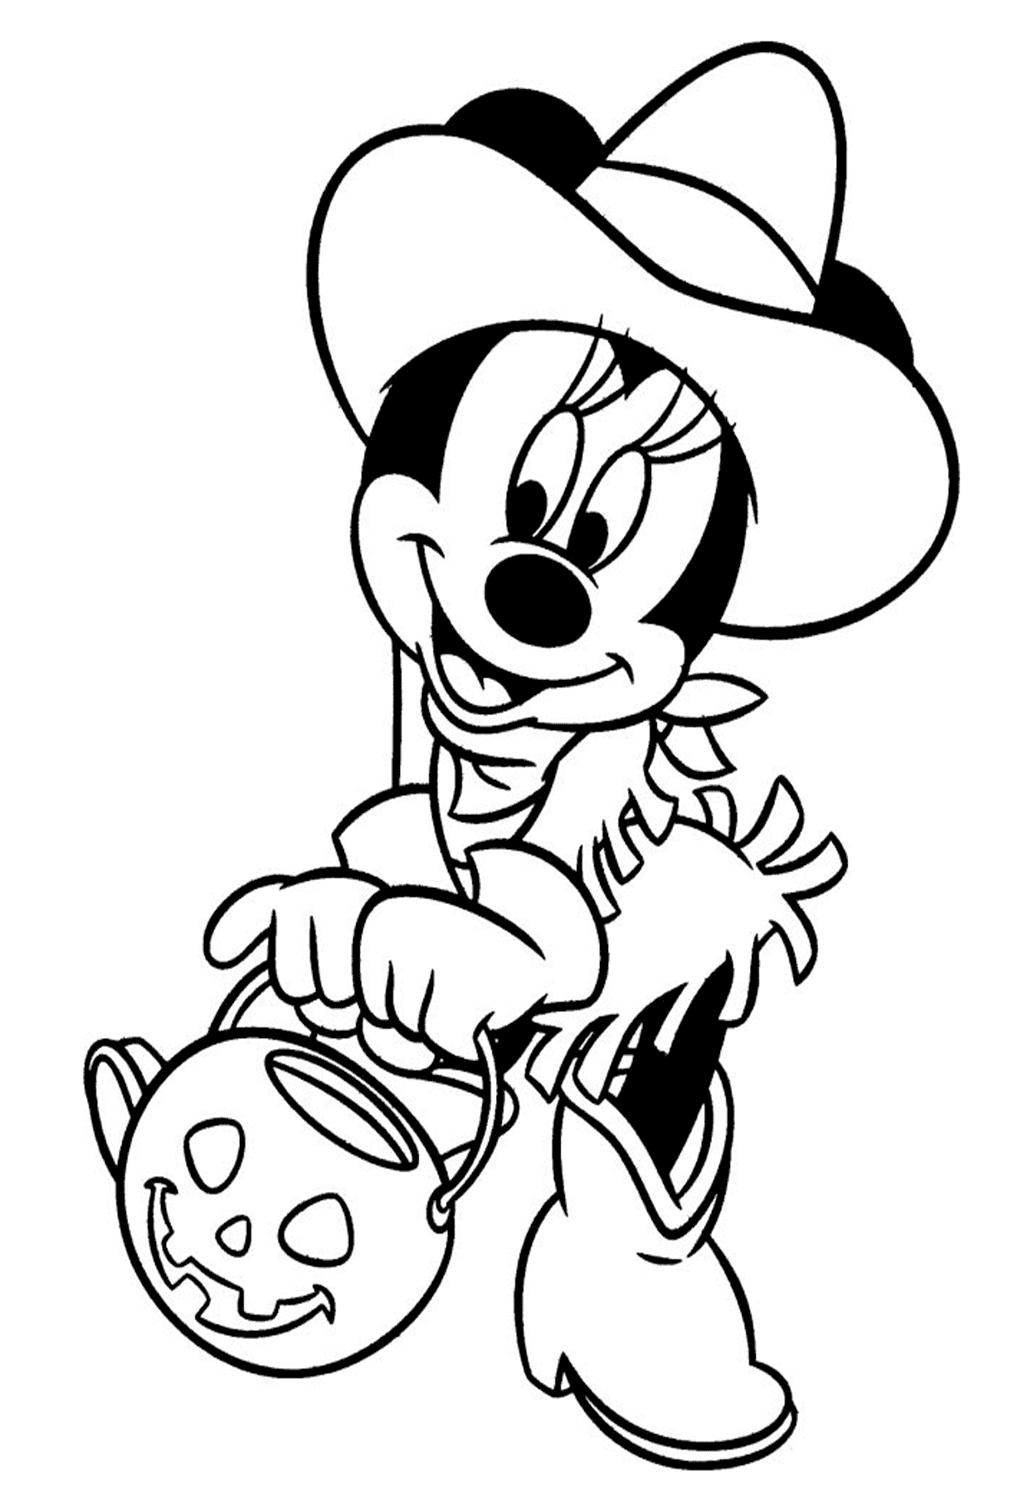 Halloween Minnie Mouse Cowboy Costume Coloring Pages